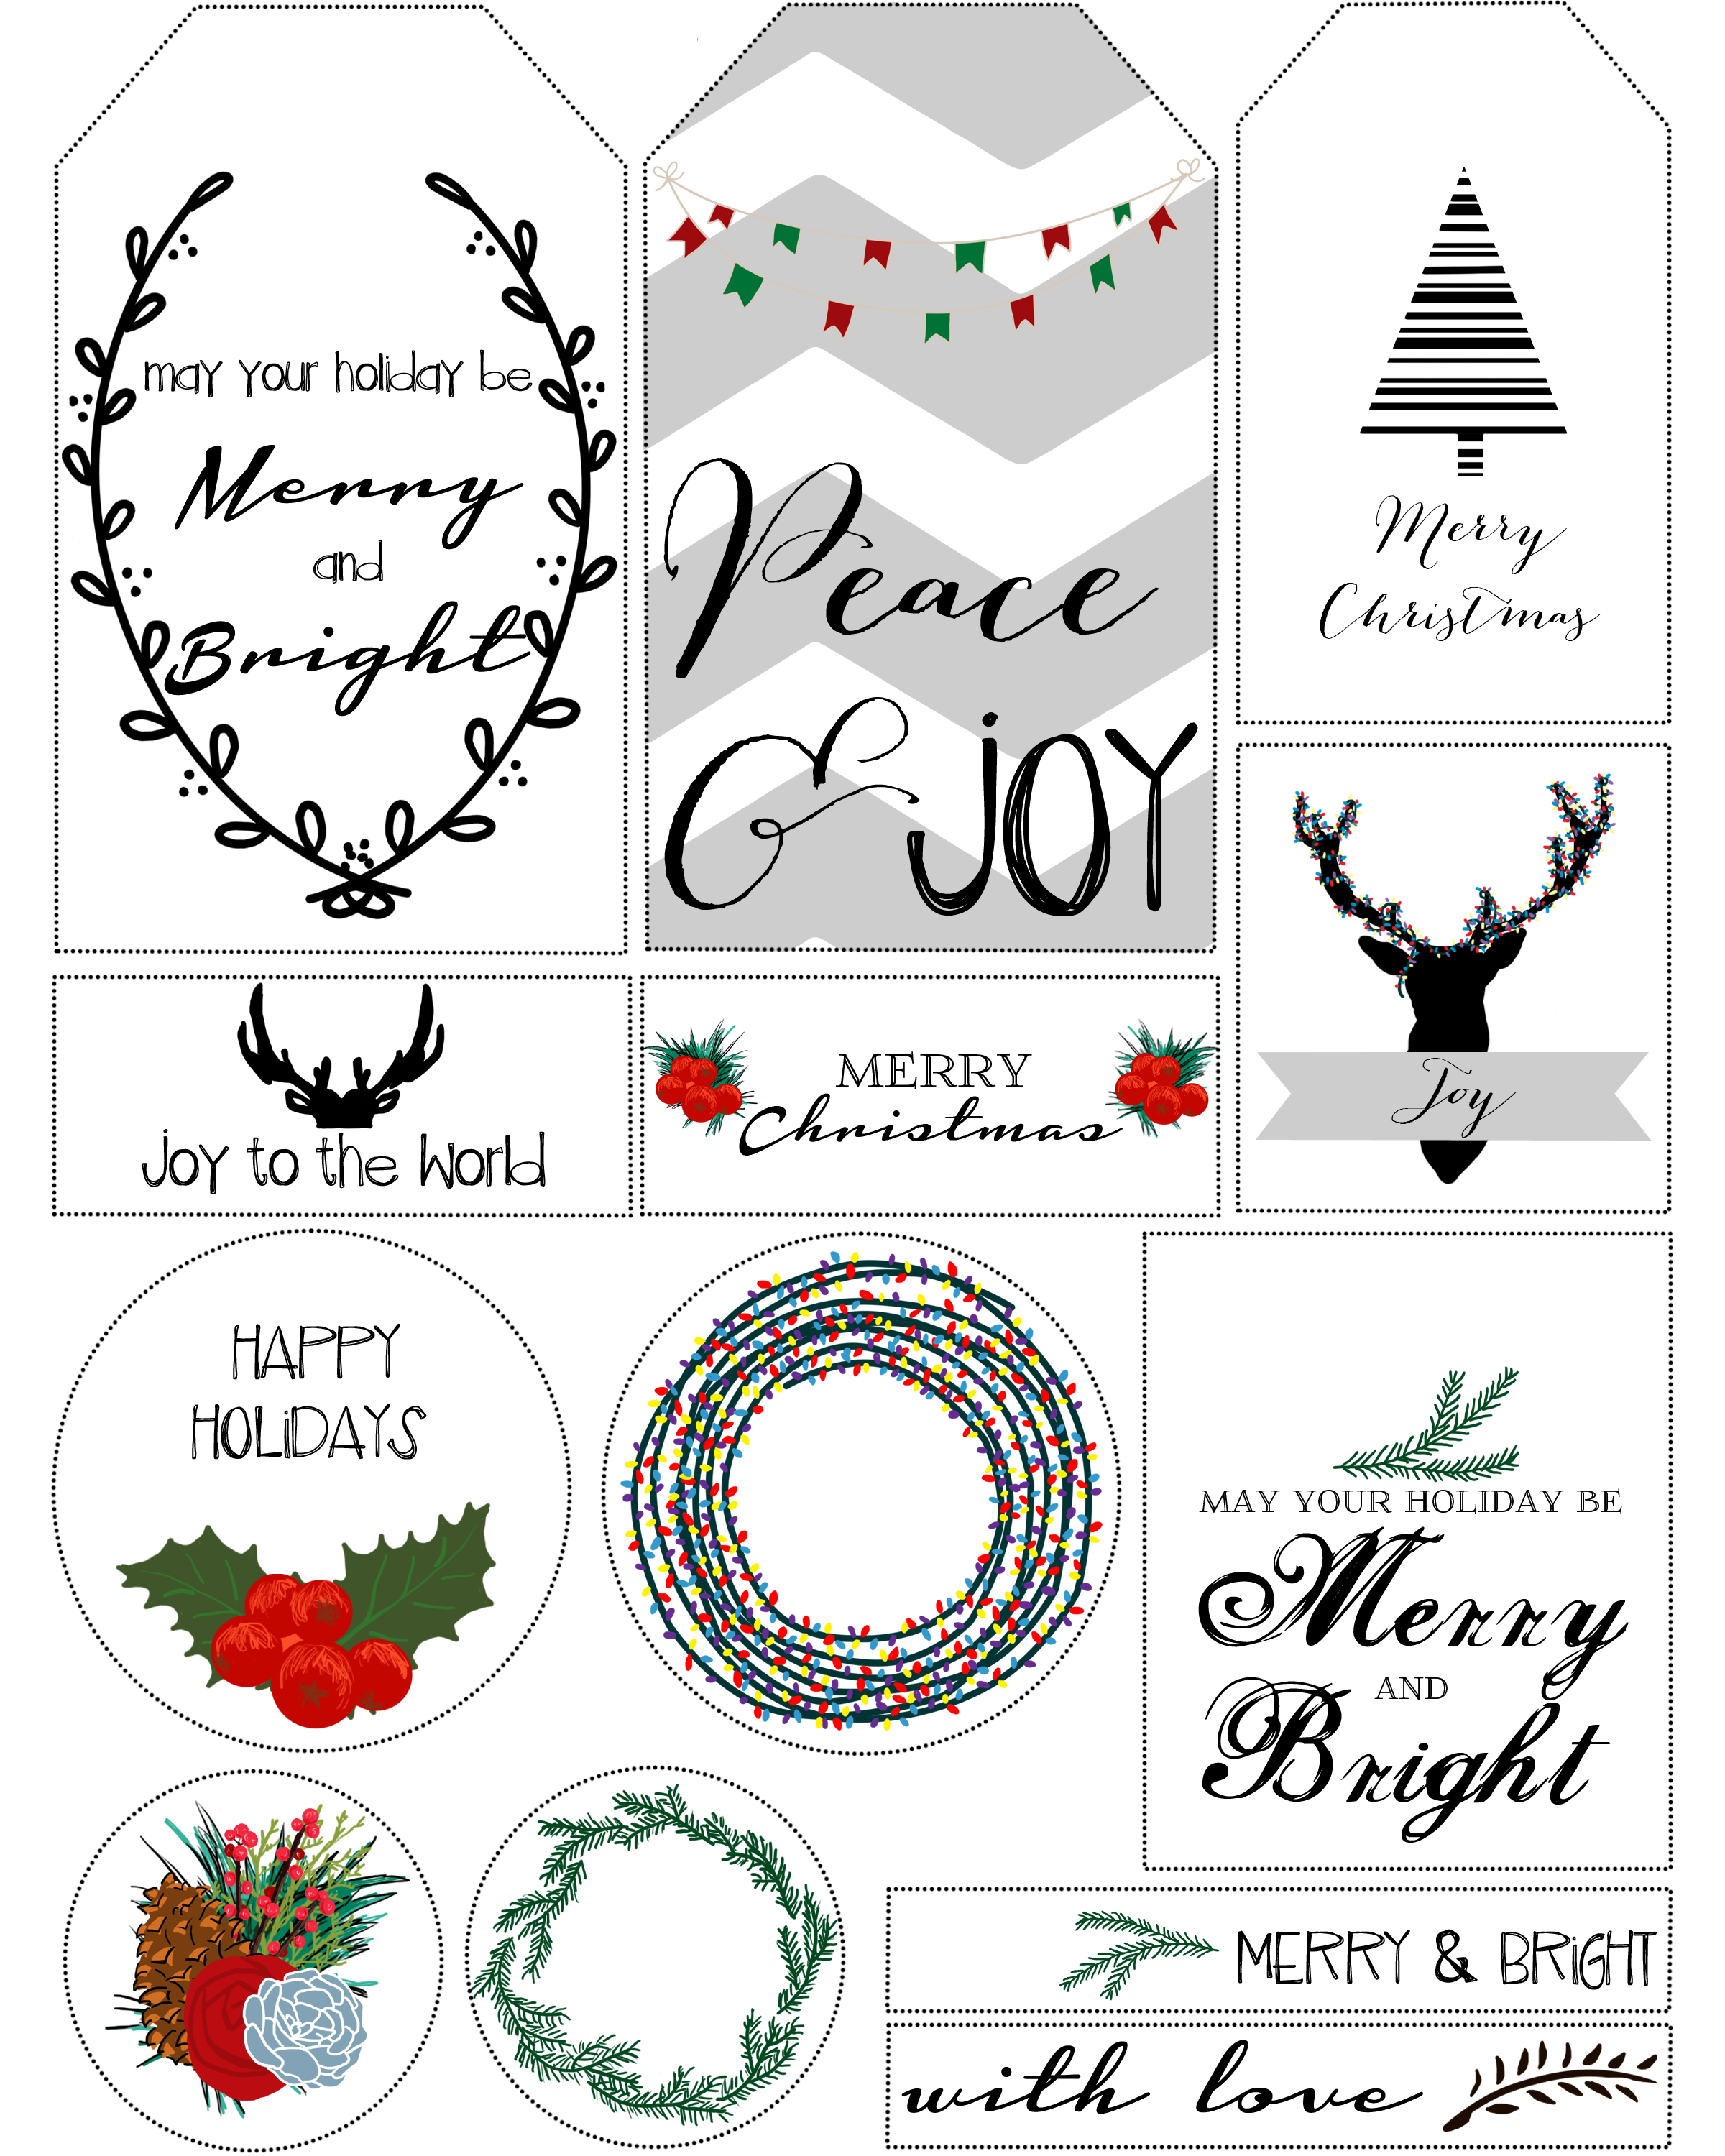 Gift Printable Images Gallery Category Page 1 Printablee